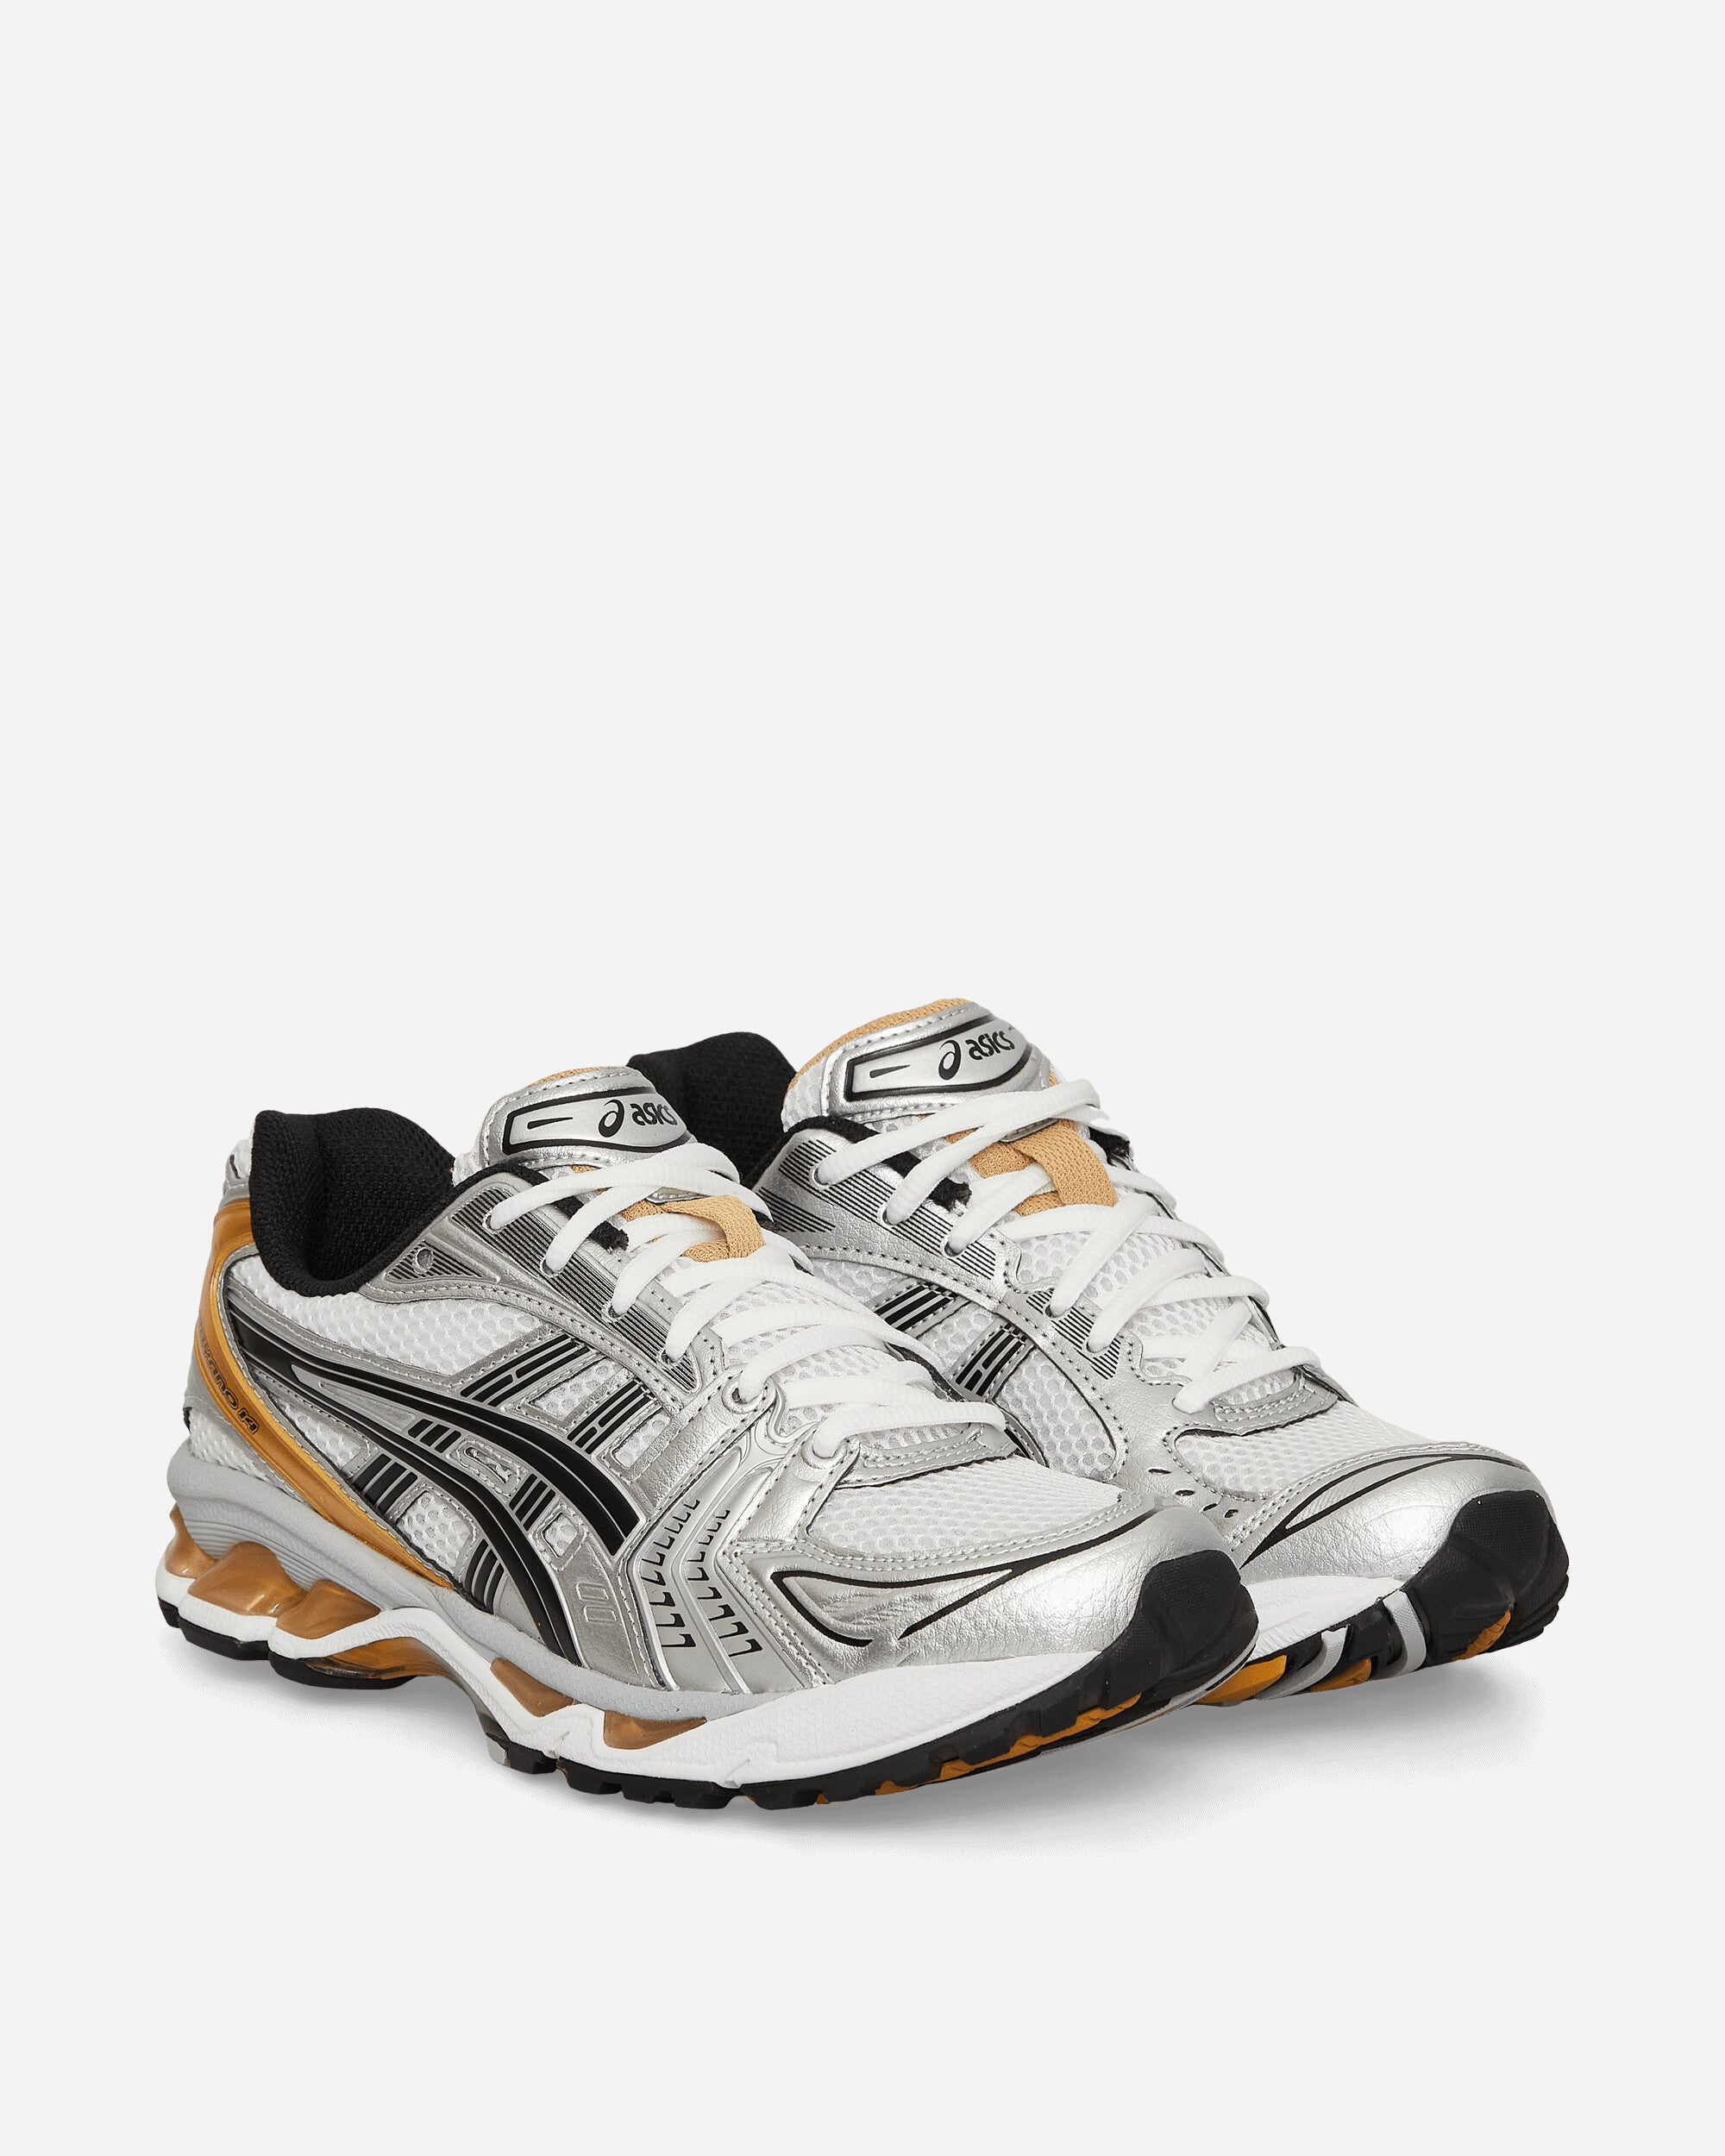 Asics GEL-Kayano 14 Sneakers White Pure Gold - Slam Jam® Official Store